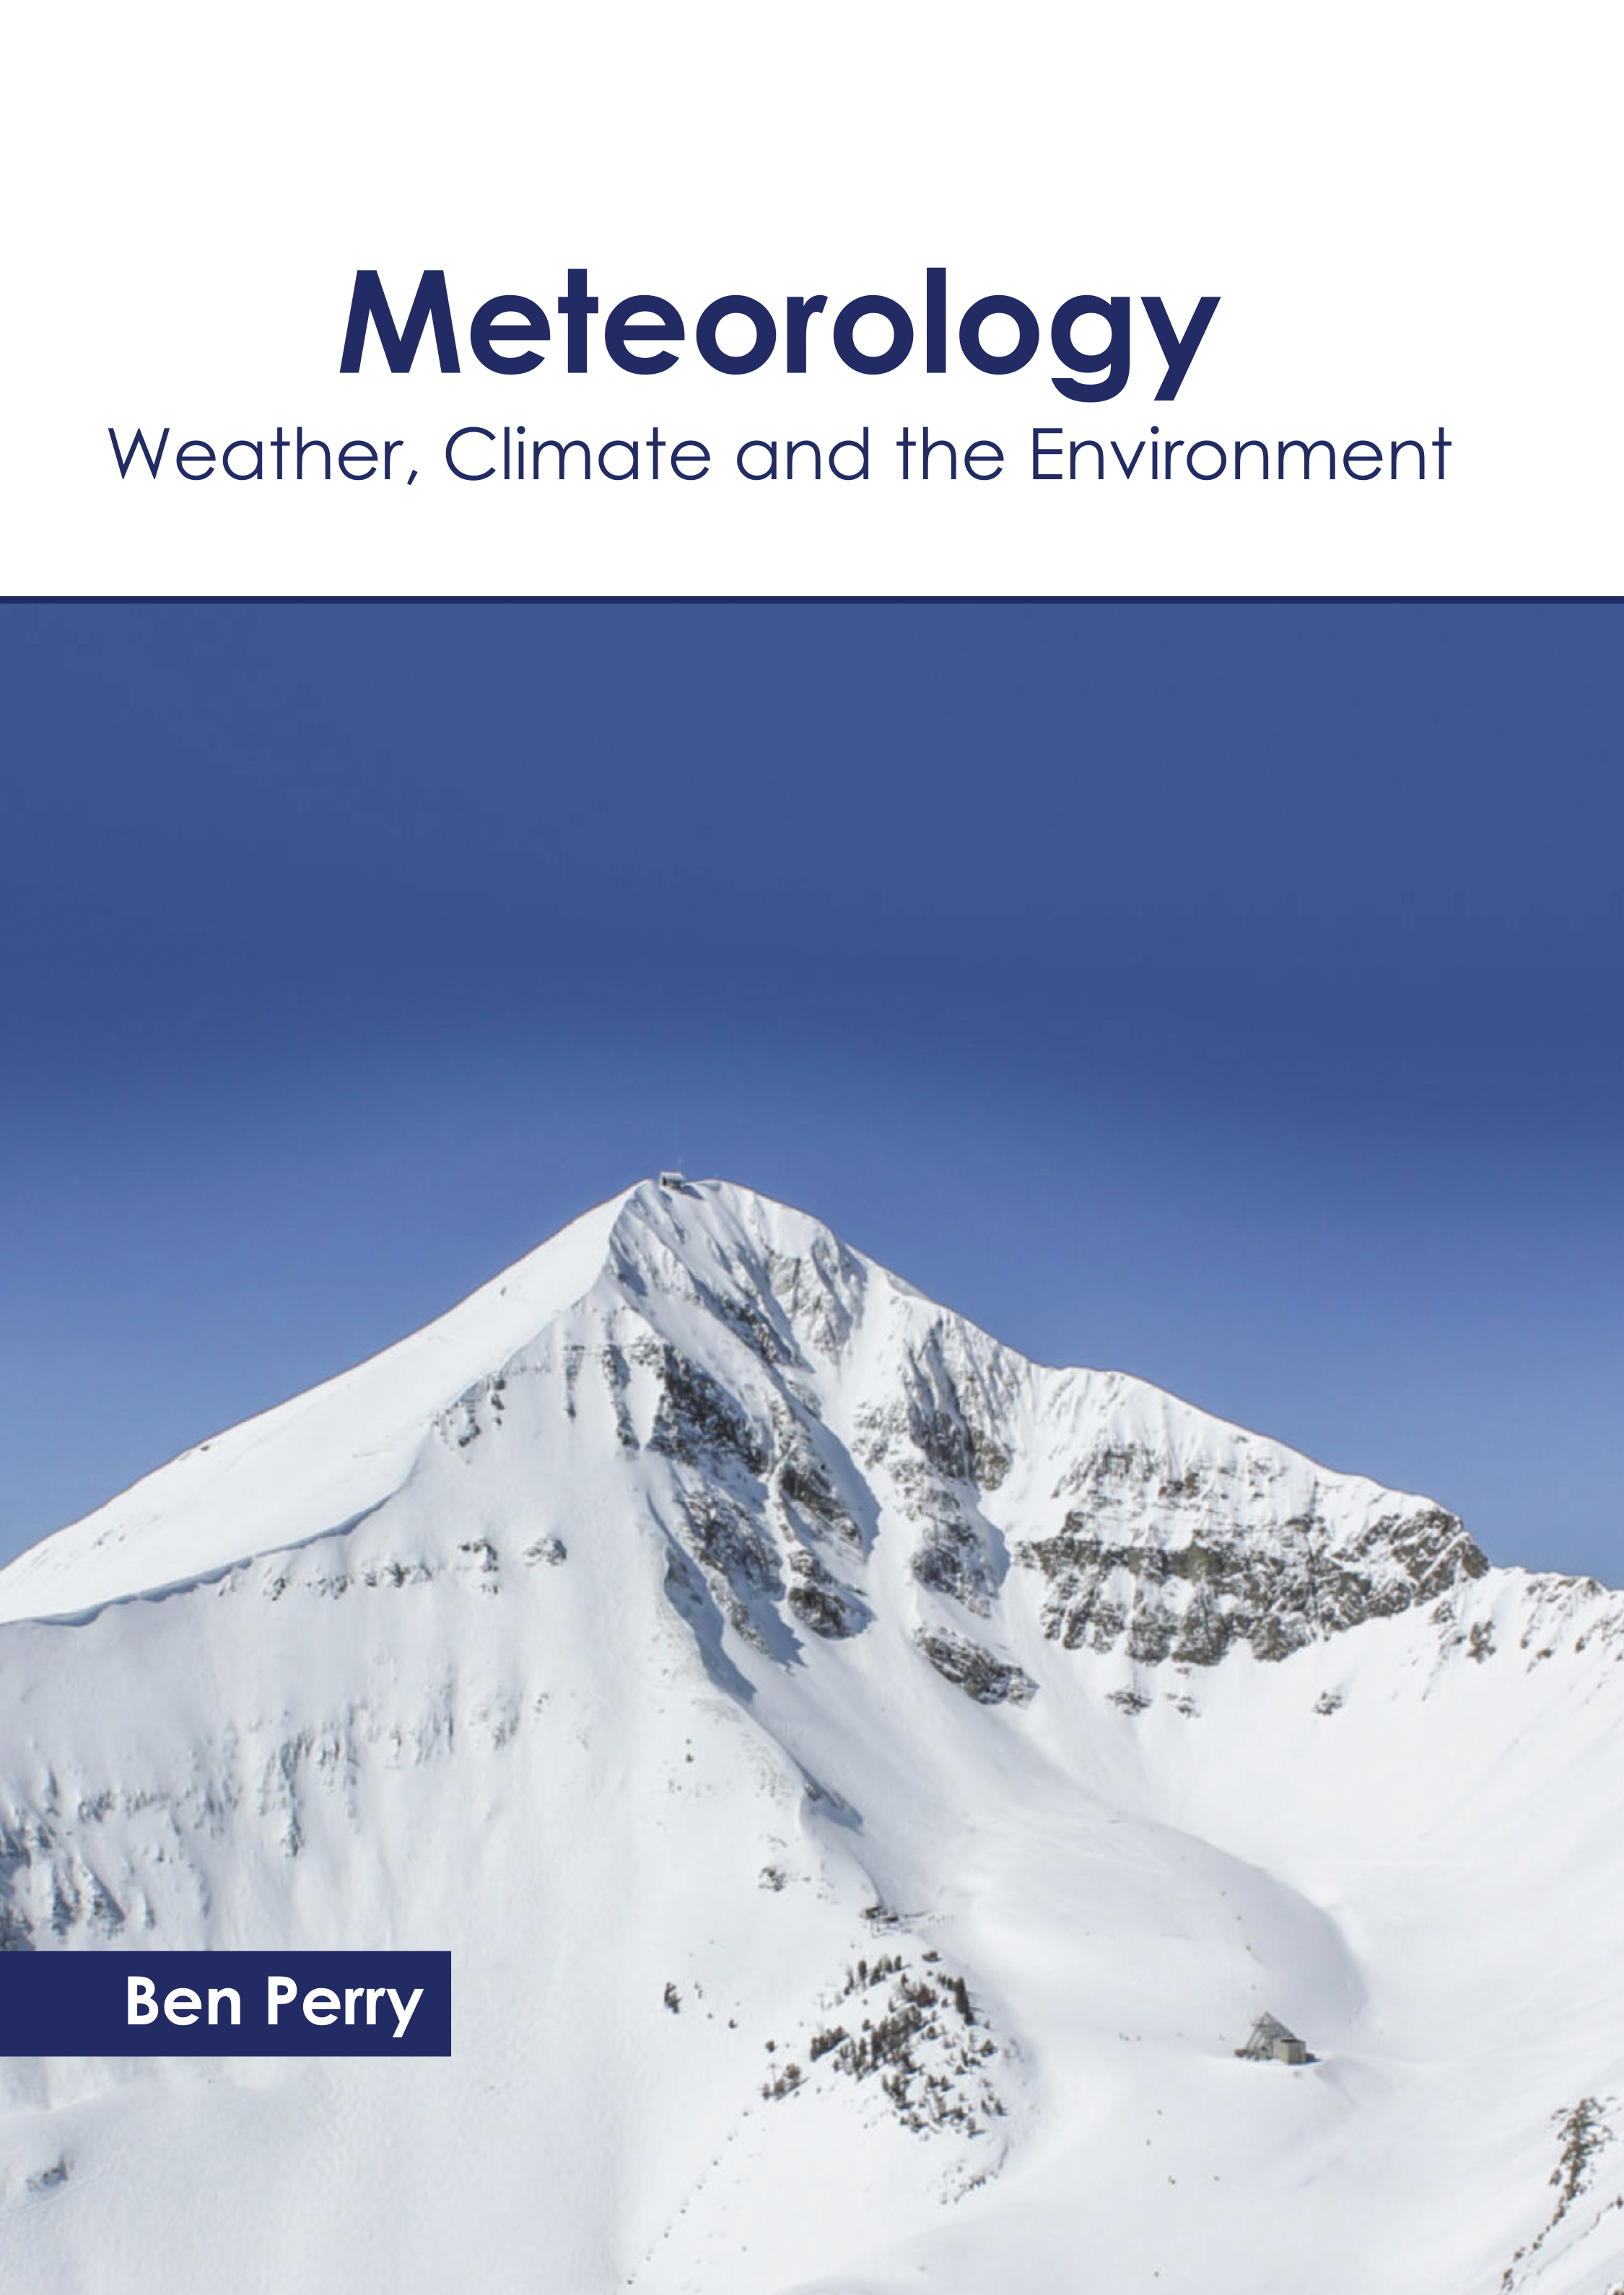 Meteorology: Weather, Climate and the Environment